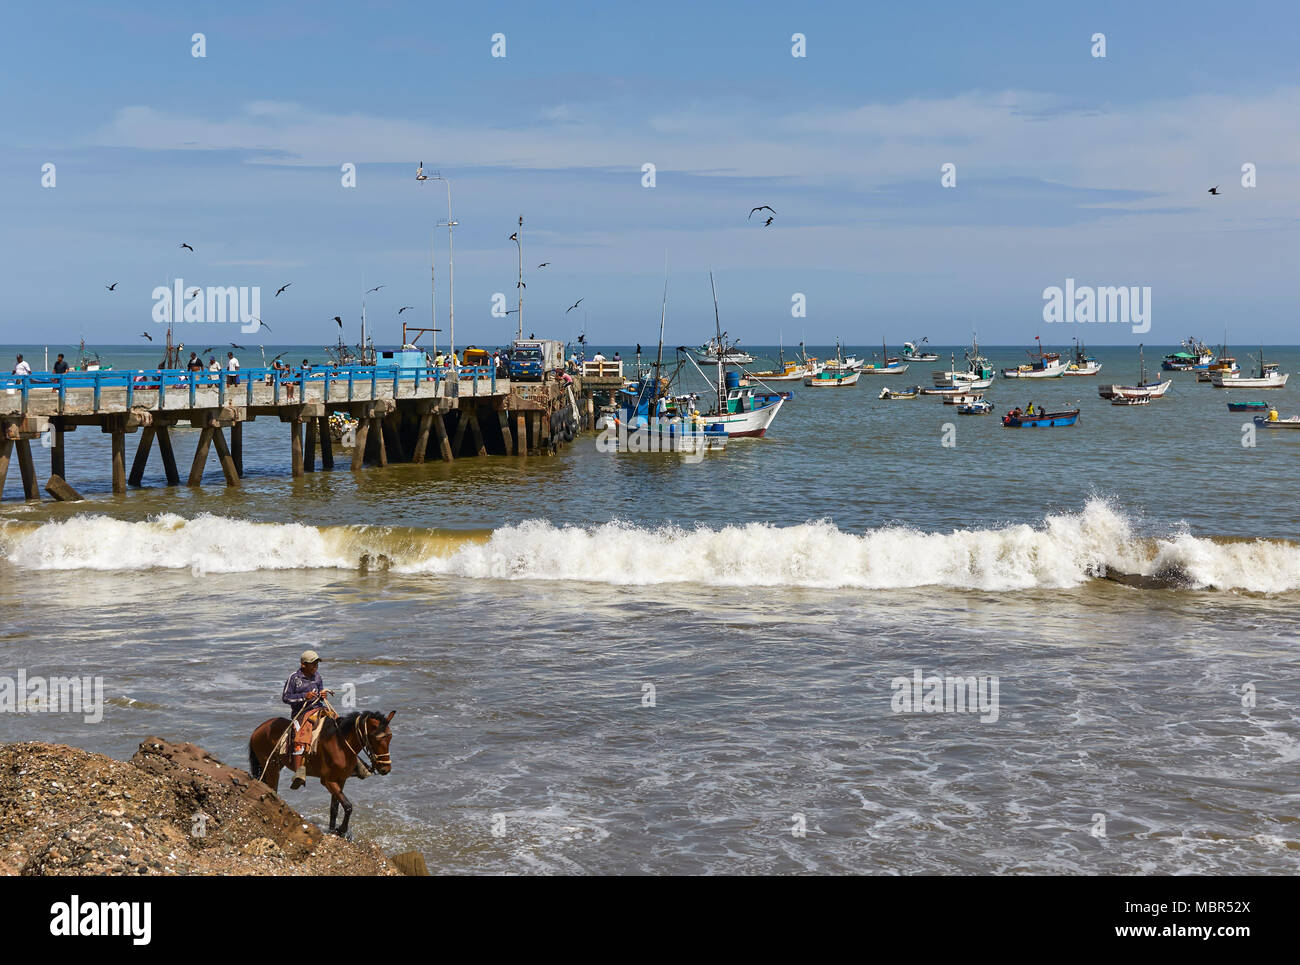 Fishermen on Mancora Fishing Pier unloading their Boats and supervising distribution of their Fish, while a Horse rider rides along the Beach in the F Stock Photo